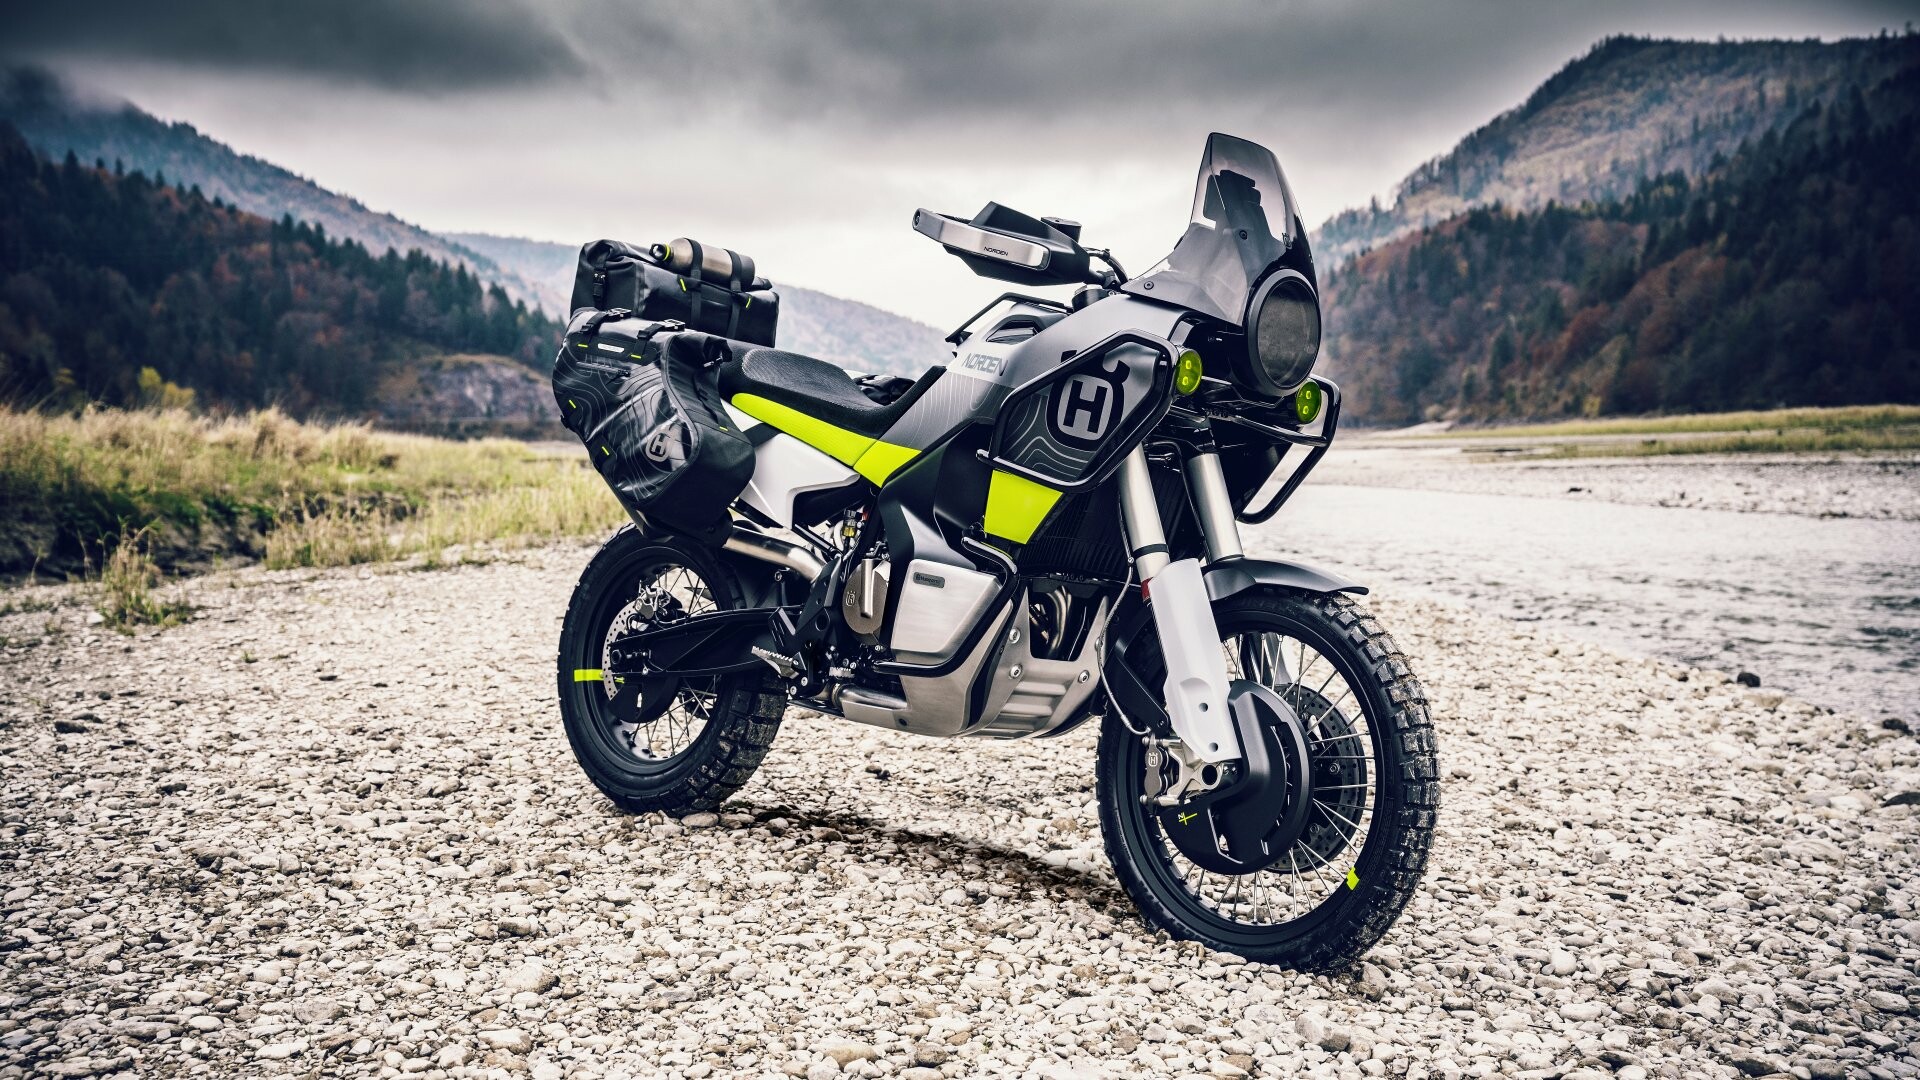 Husqvarna: Norden 901, An adventure touring motorcycle, Powered by 889 cc parallel twin engine. 1920x1080 Full HD Background.